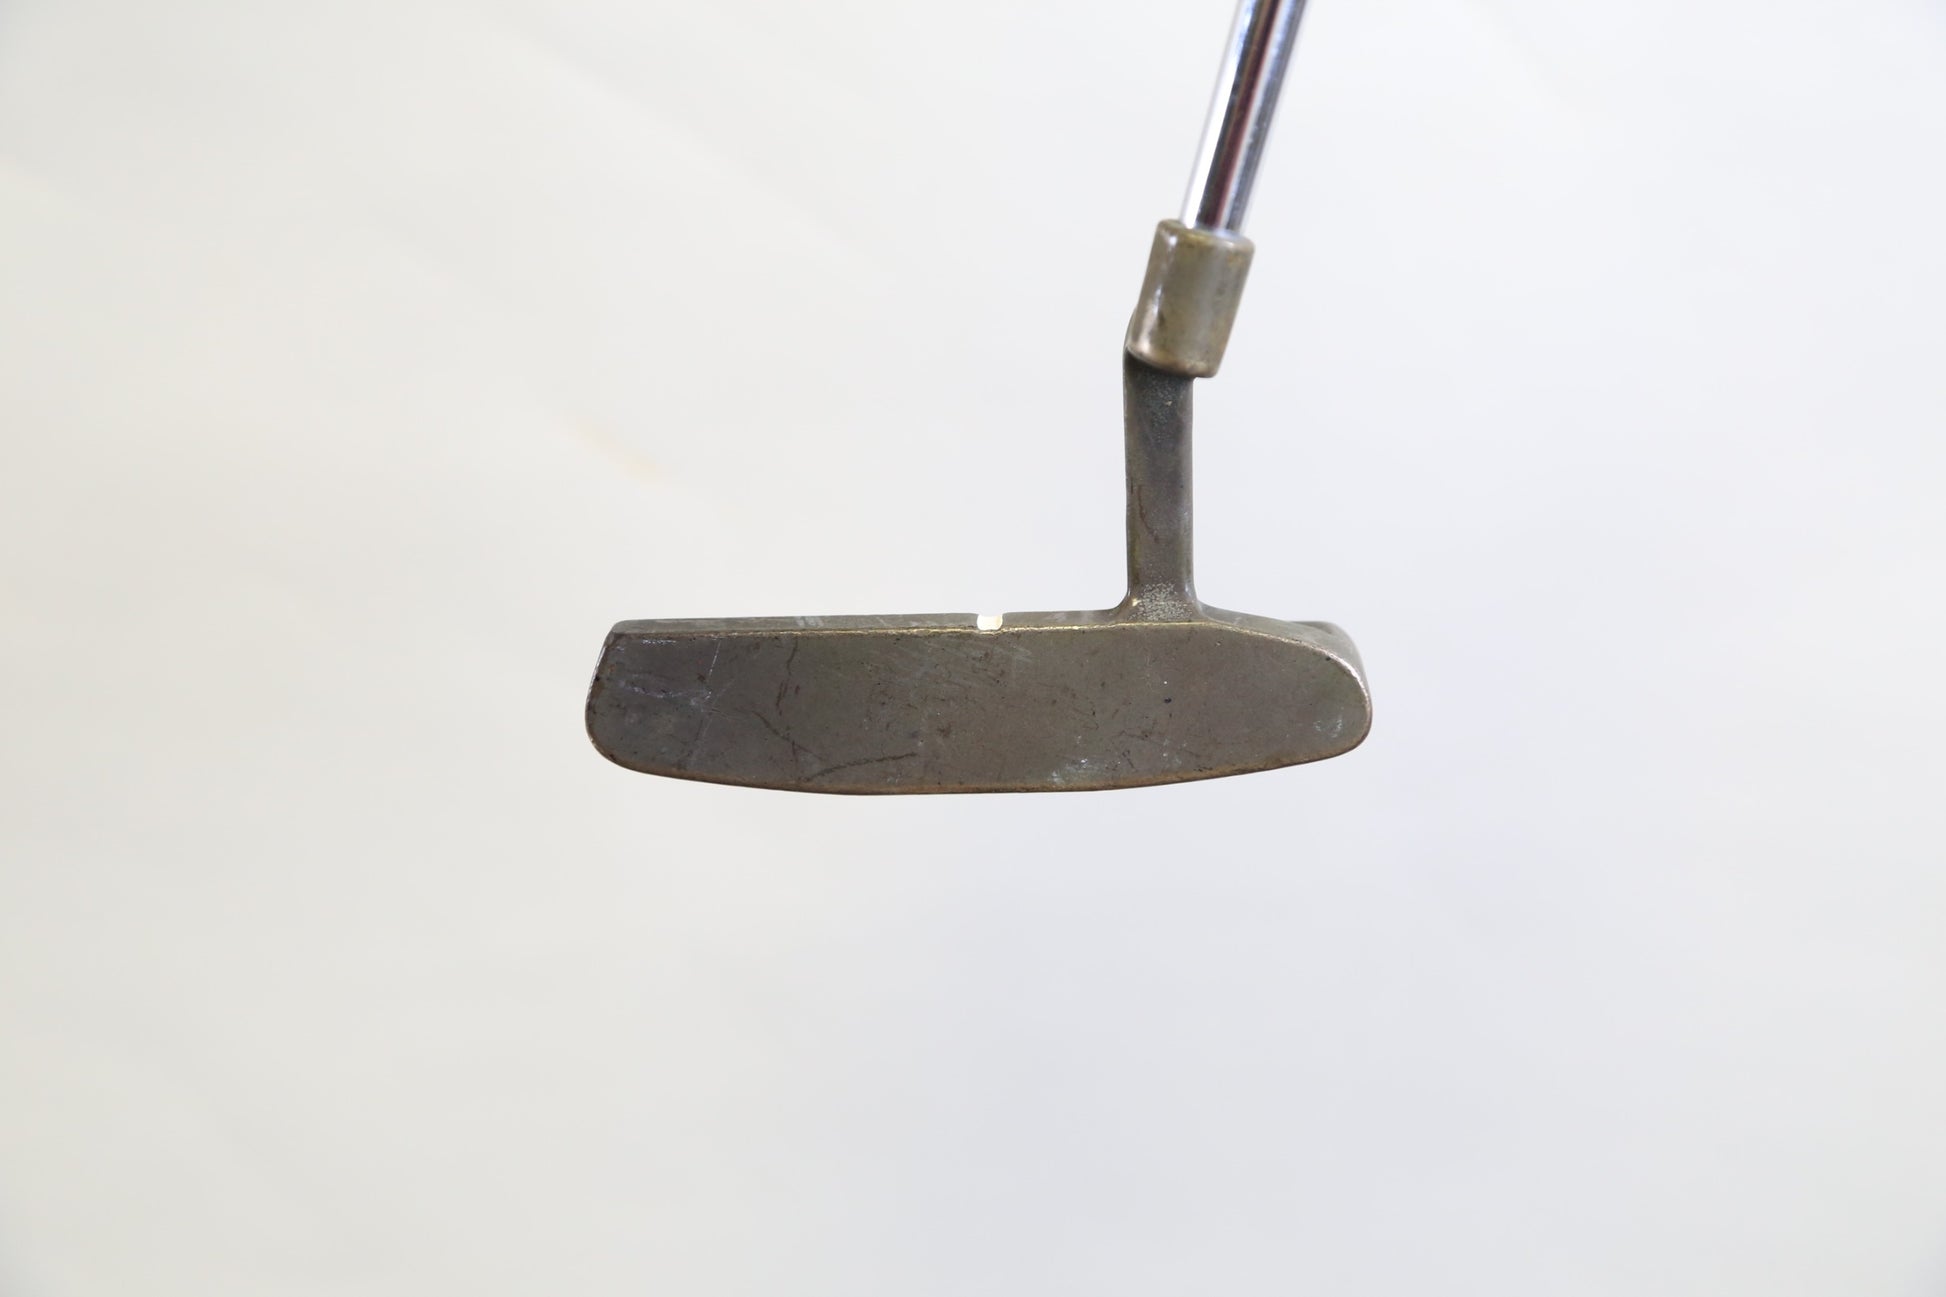 Used Ping PAL Putter - Right-Handed - 36 in - Blade-Next Round